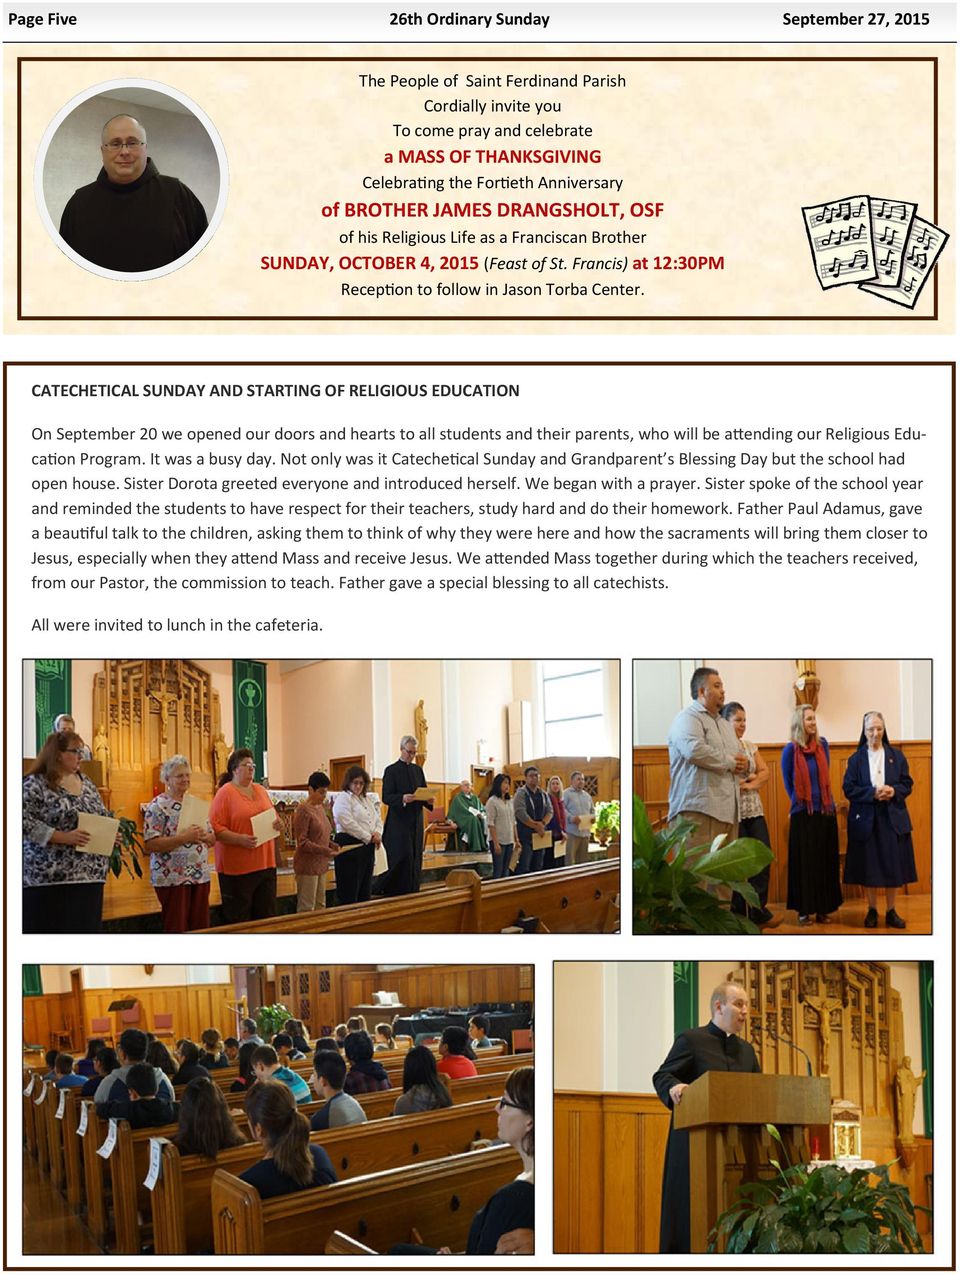 CATECHETICAL SUNDAY AND STARTING OF RELIGIOUS EDUCATION On September 20 we opened our doors and hearts to all students and their parents, who will be a ending our Religious Educa on Program.